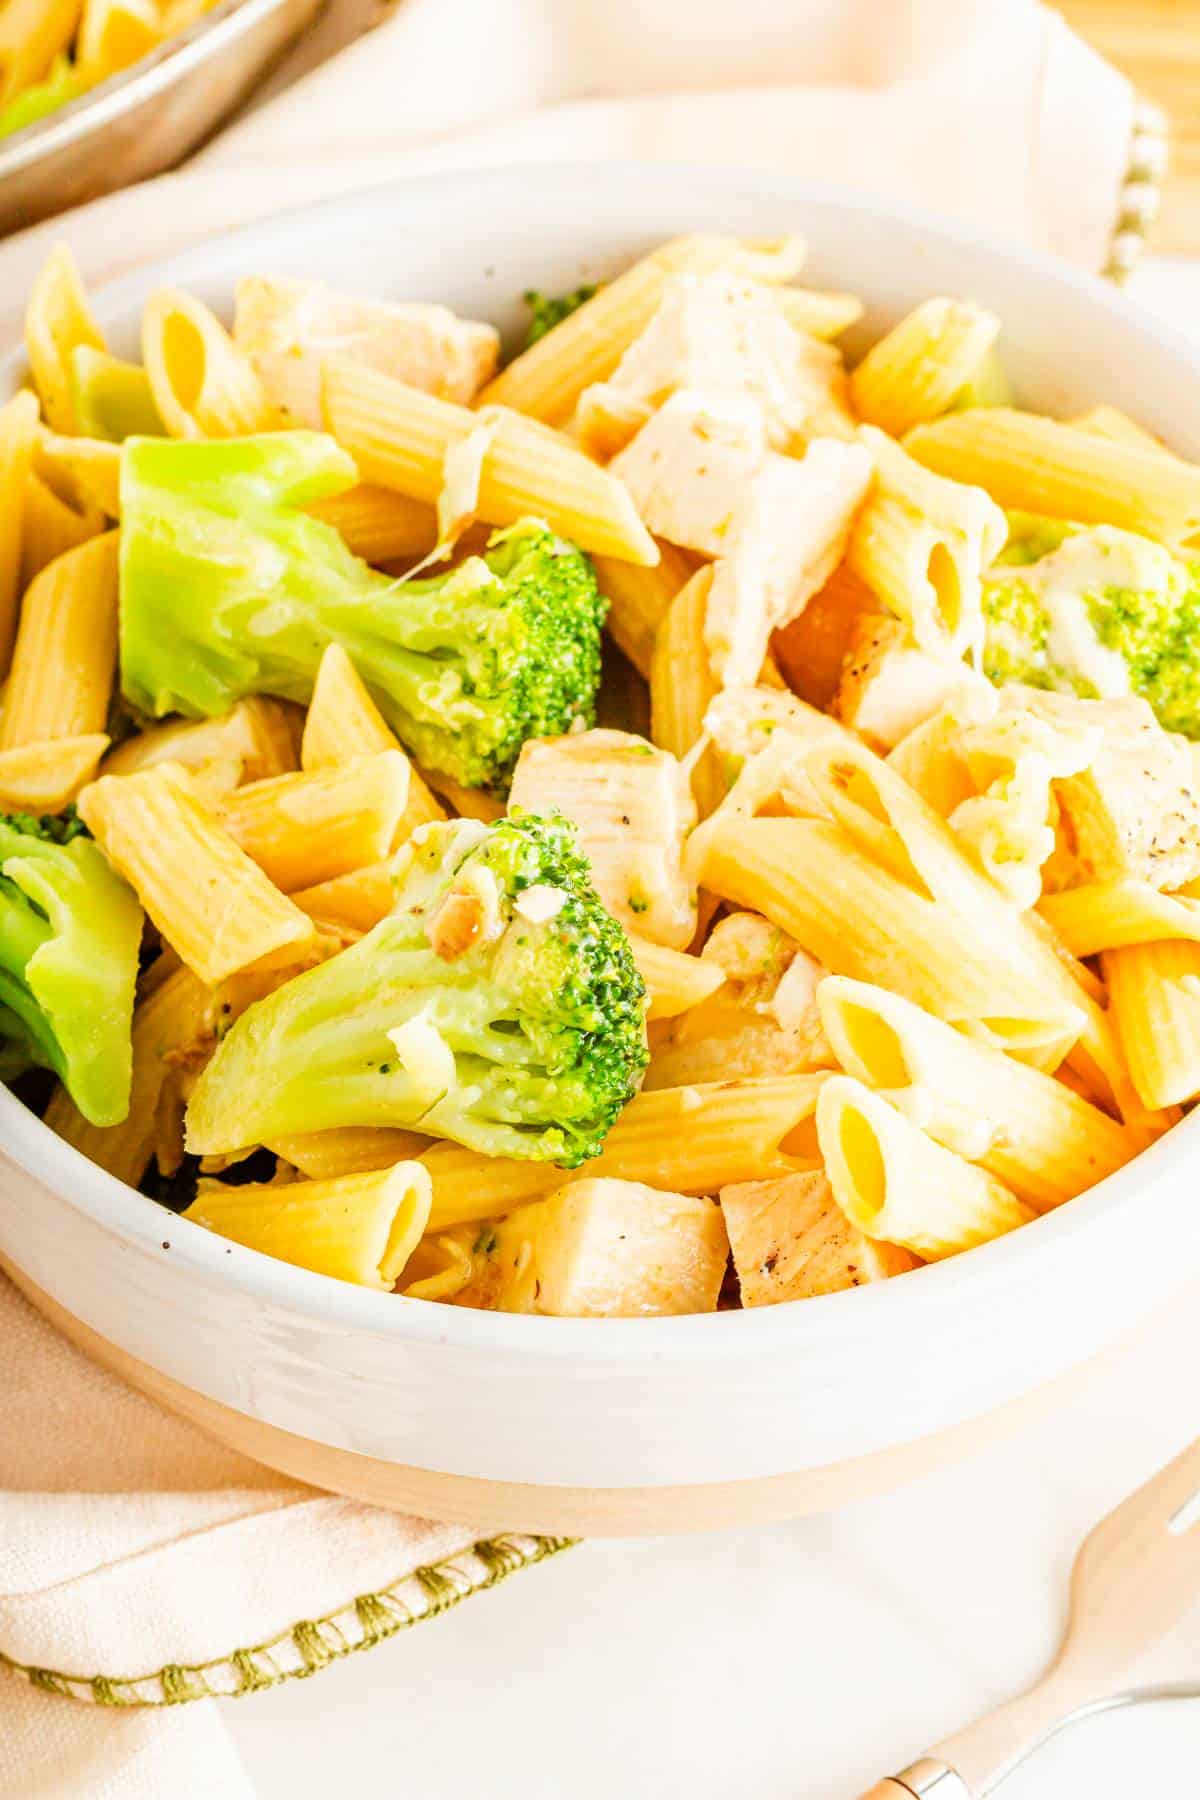 A penne pasta dish with tender chicken and fresh broccoli.